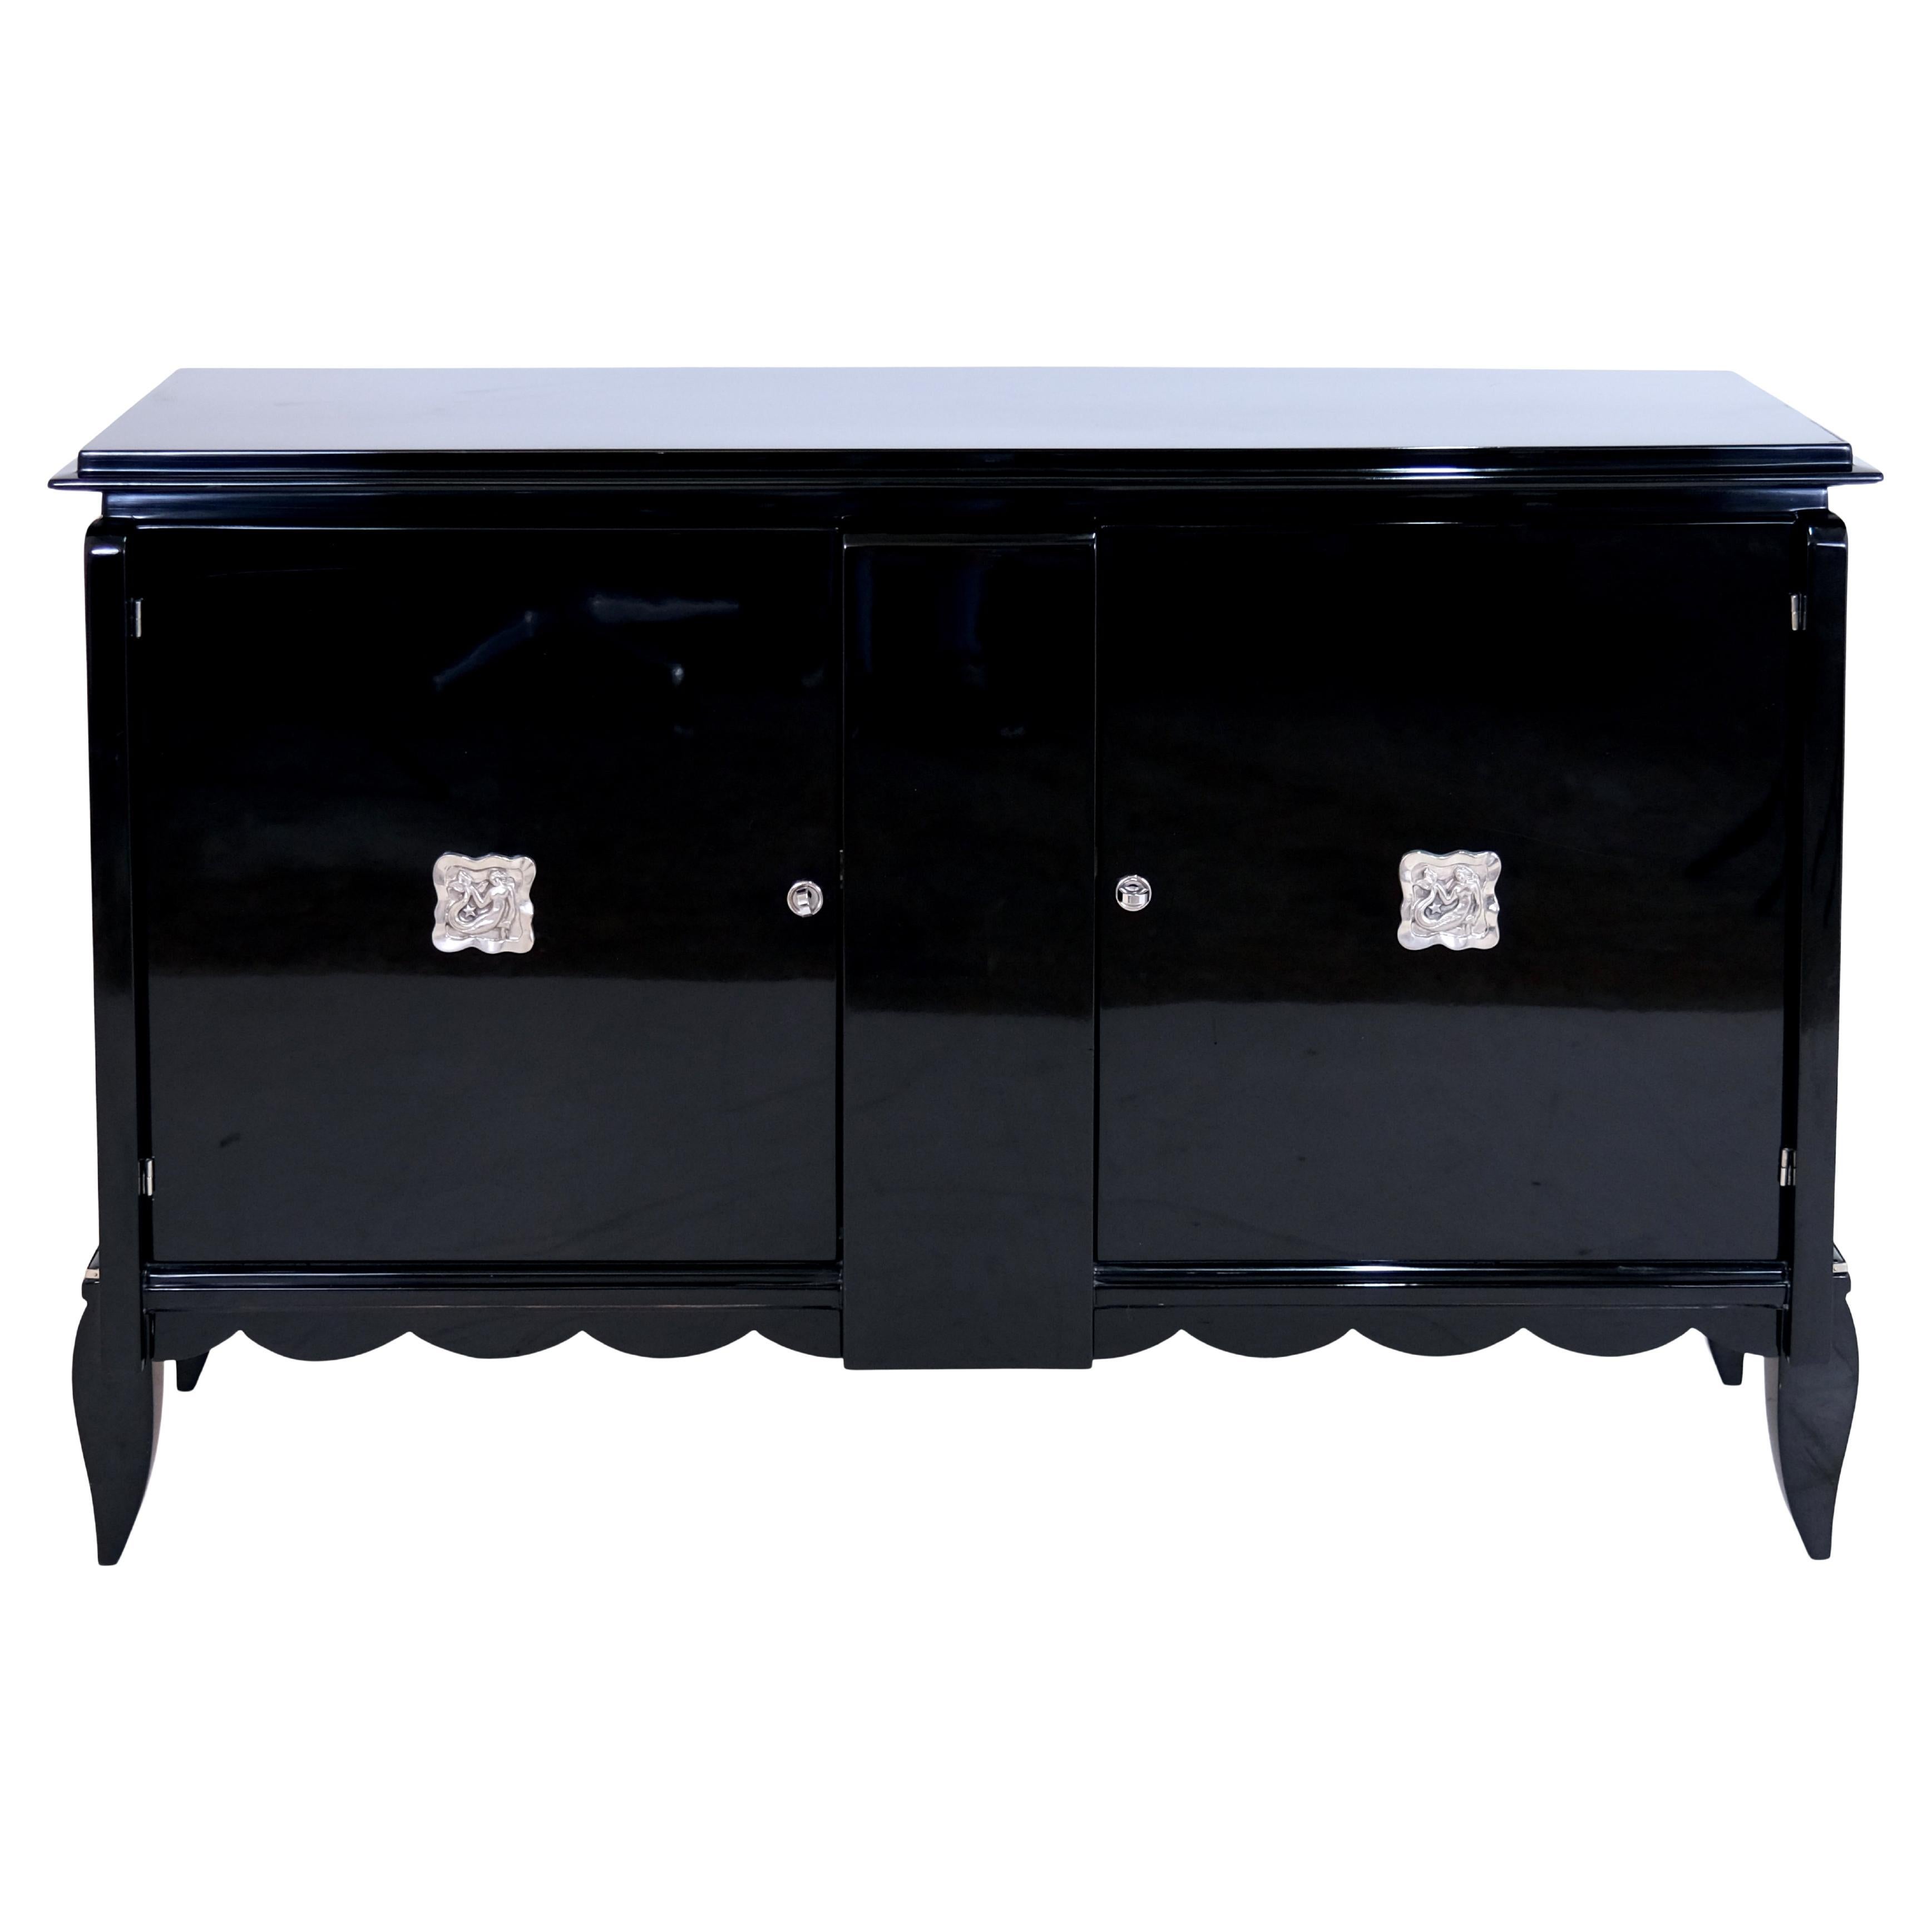 1930s French Art Deco Sideboard in Black Piano Lacquer with Chromed Emblems For Sale